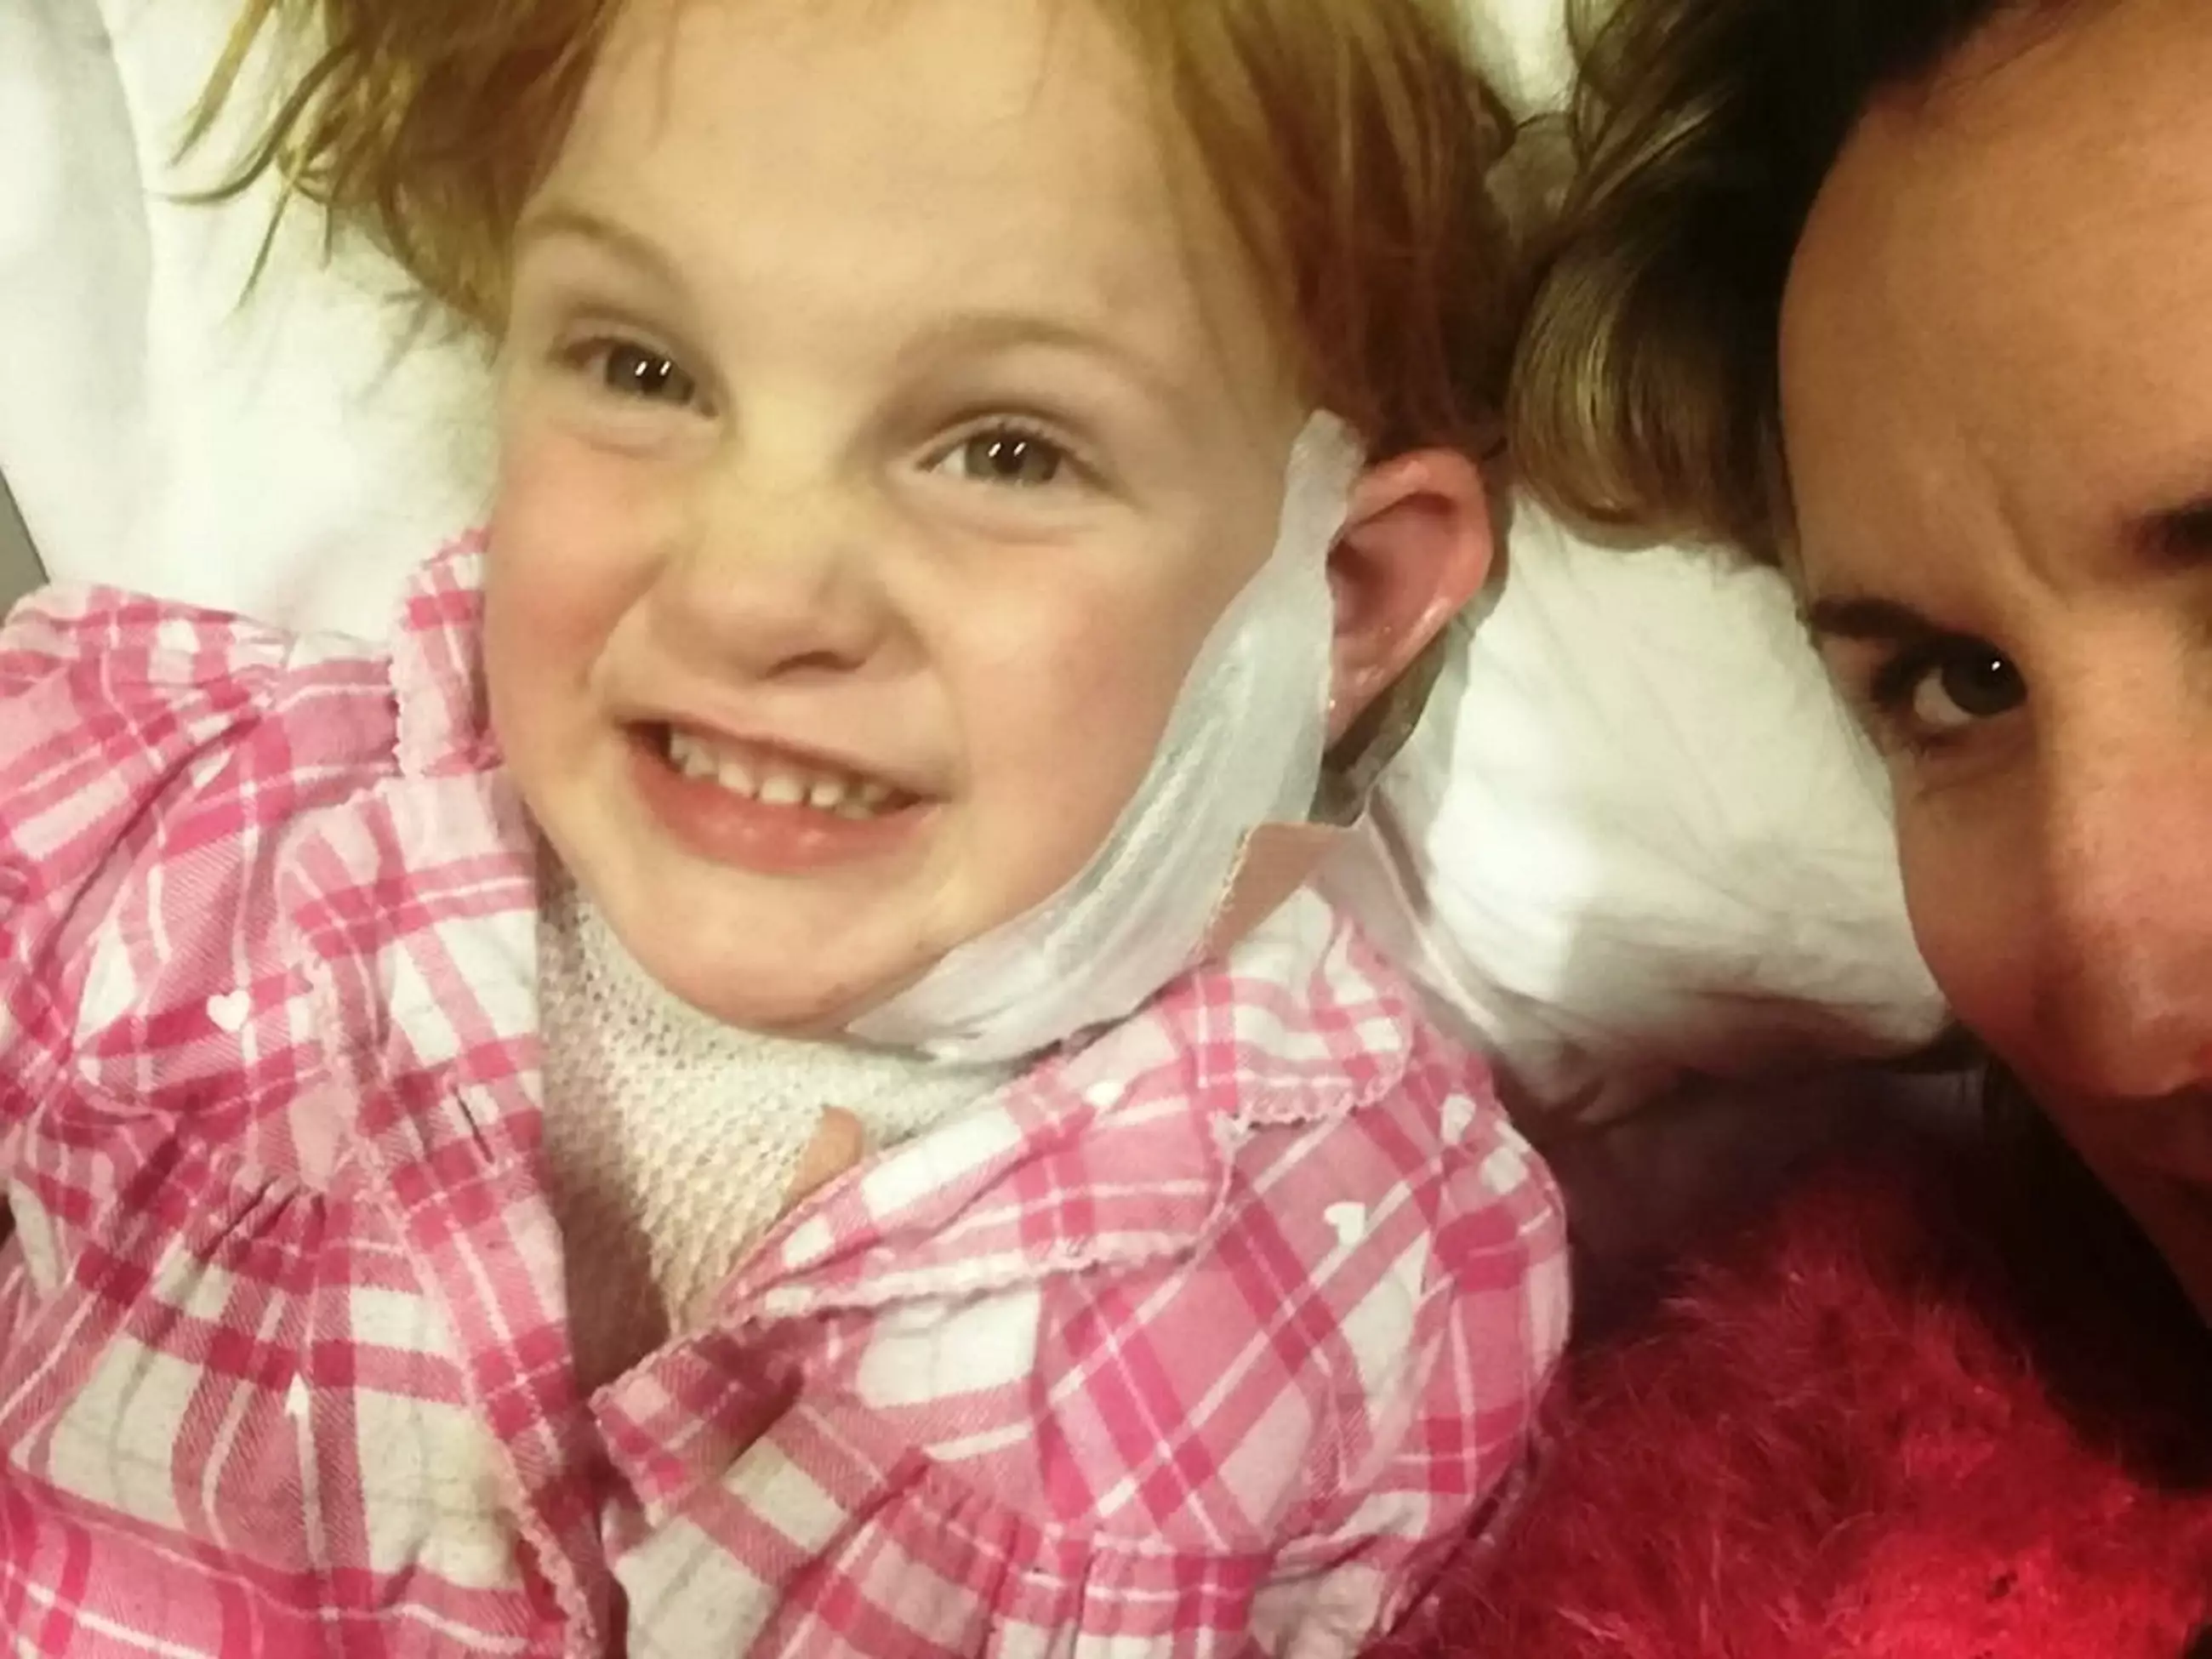 The little girl's mum says her daughter has made an 'amazing recovery' following the incident.